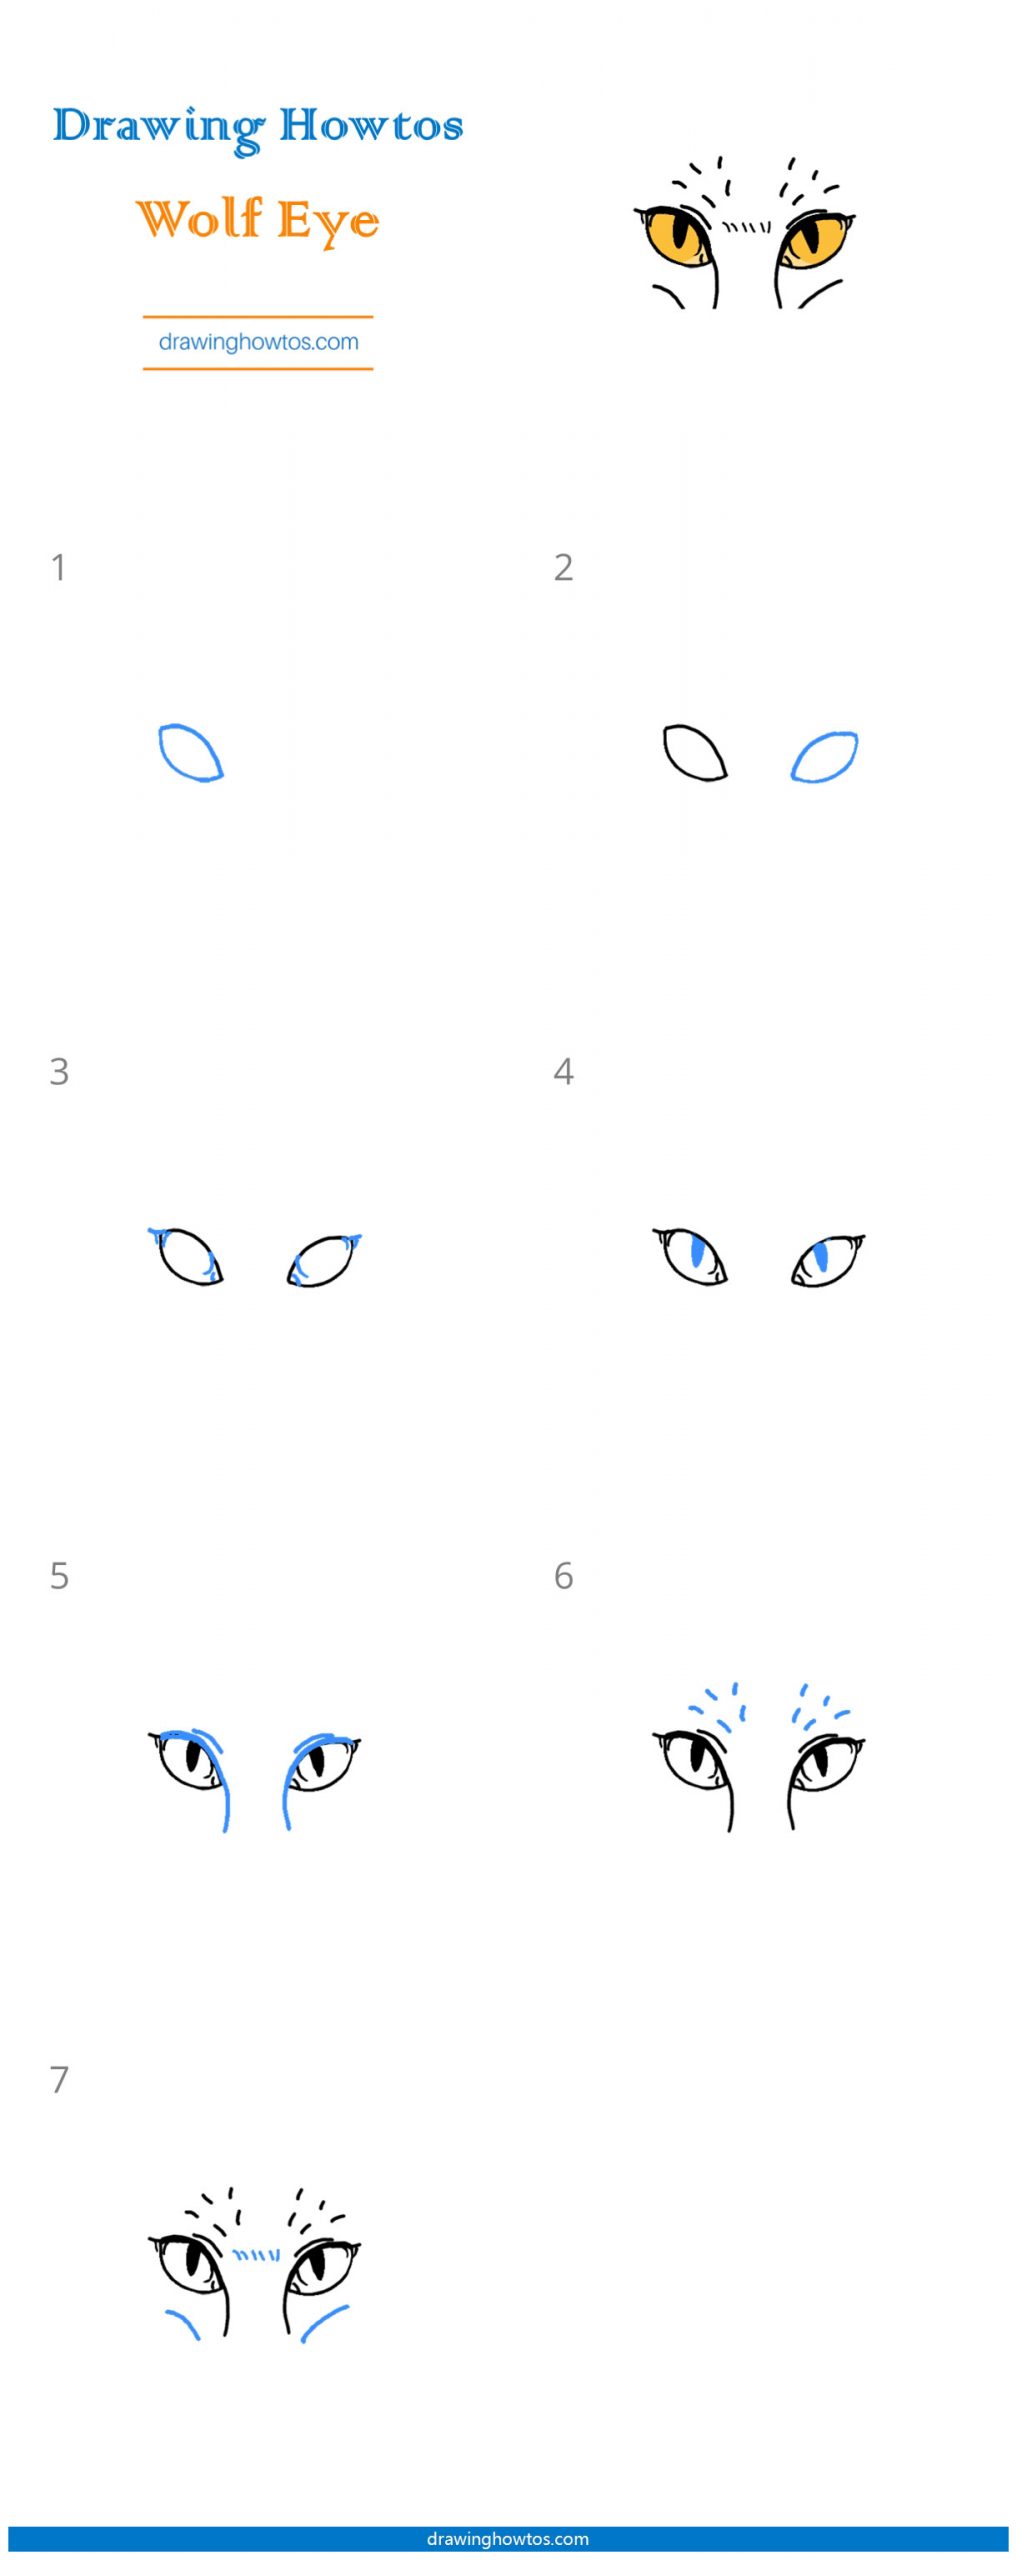 How To Draw A Wolf Eye Step By Step